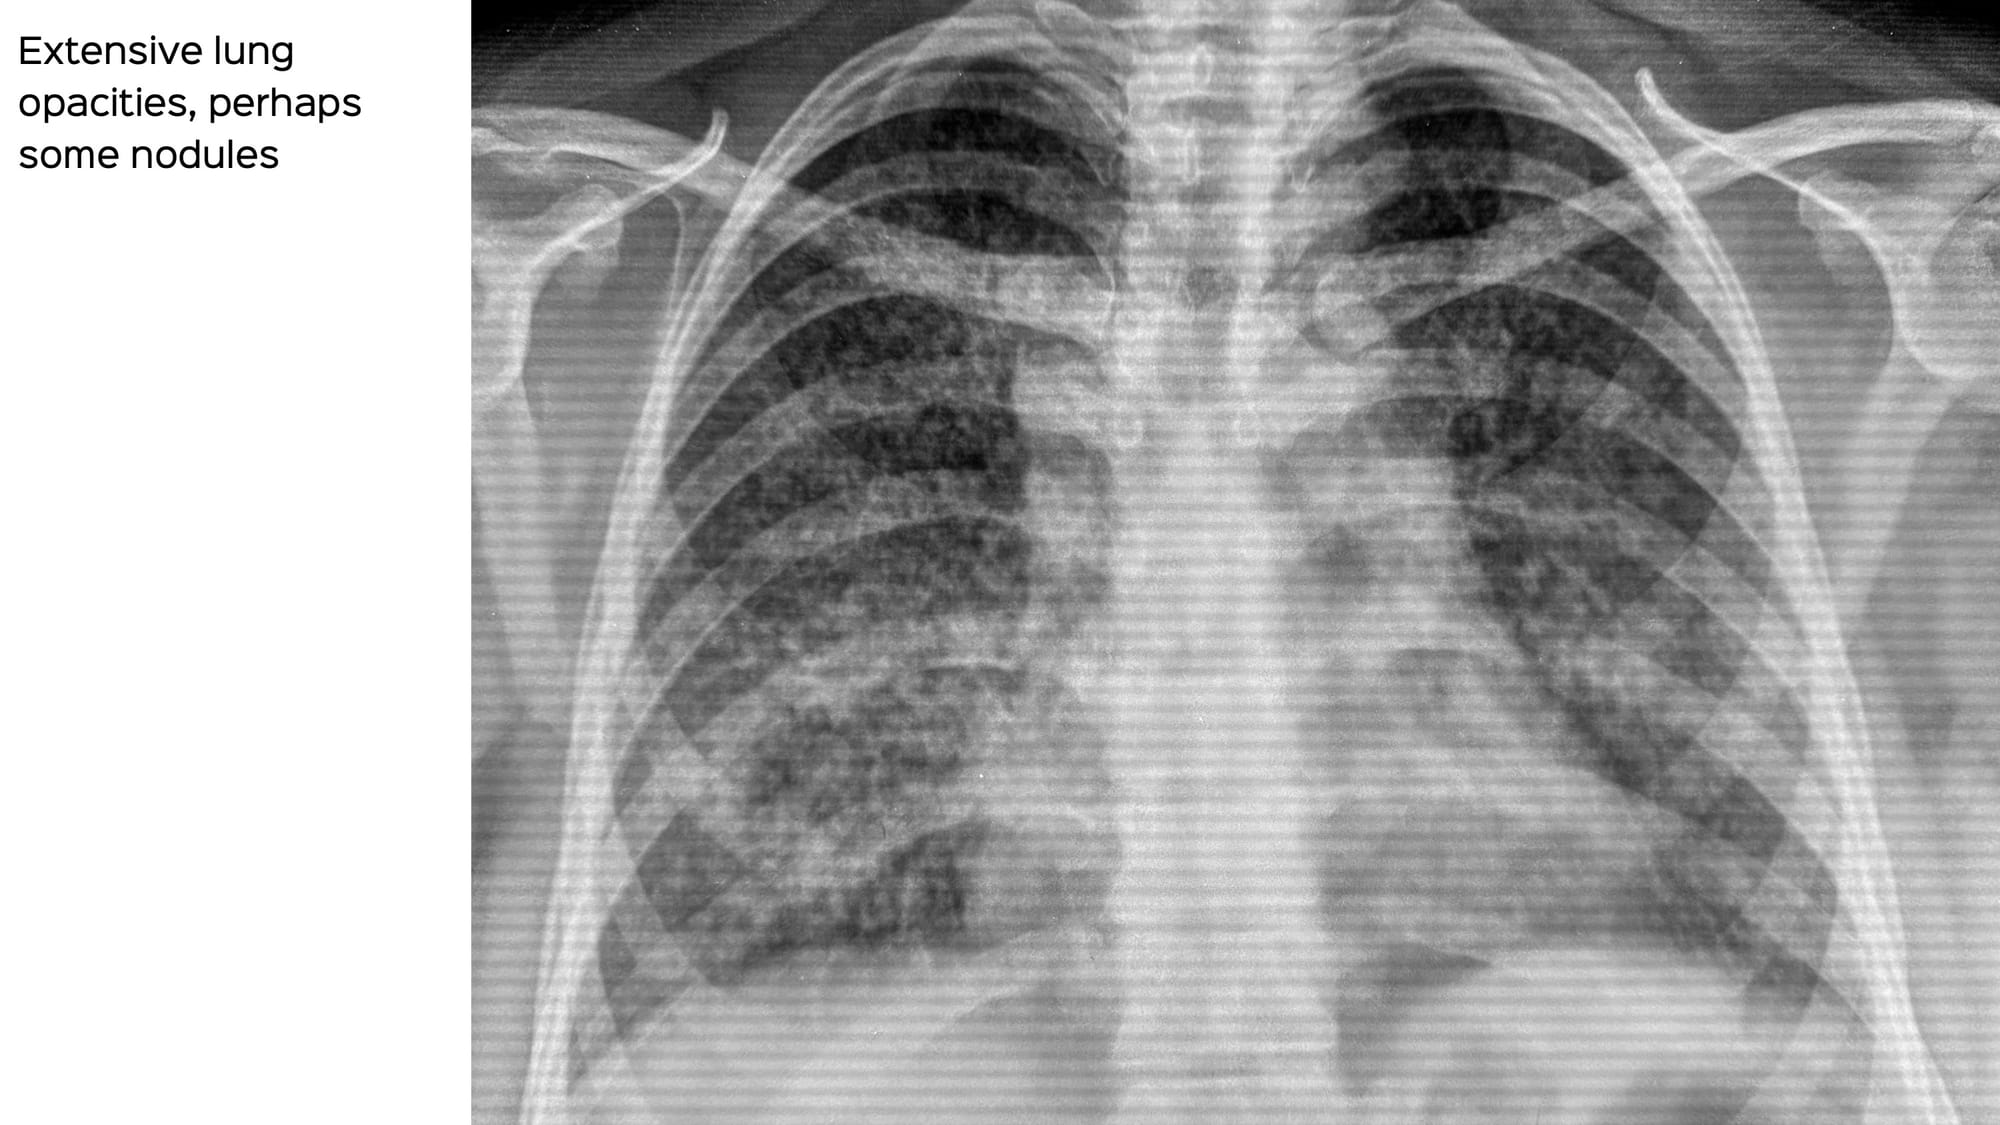 Case 97: How to Identify and Diagnose Miliary TB as a Cause of ARDS